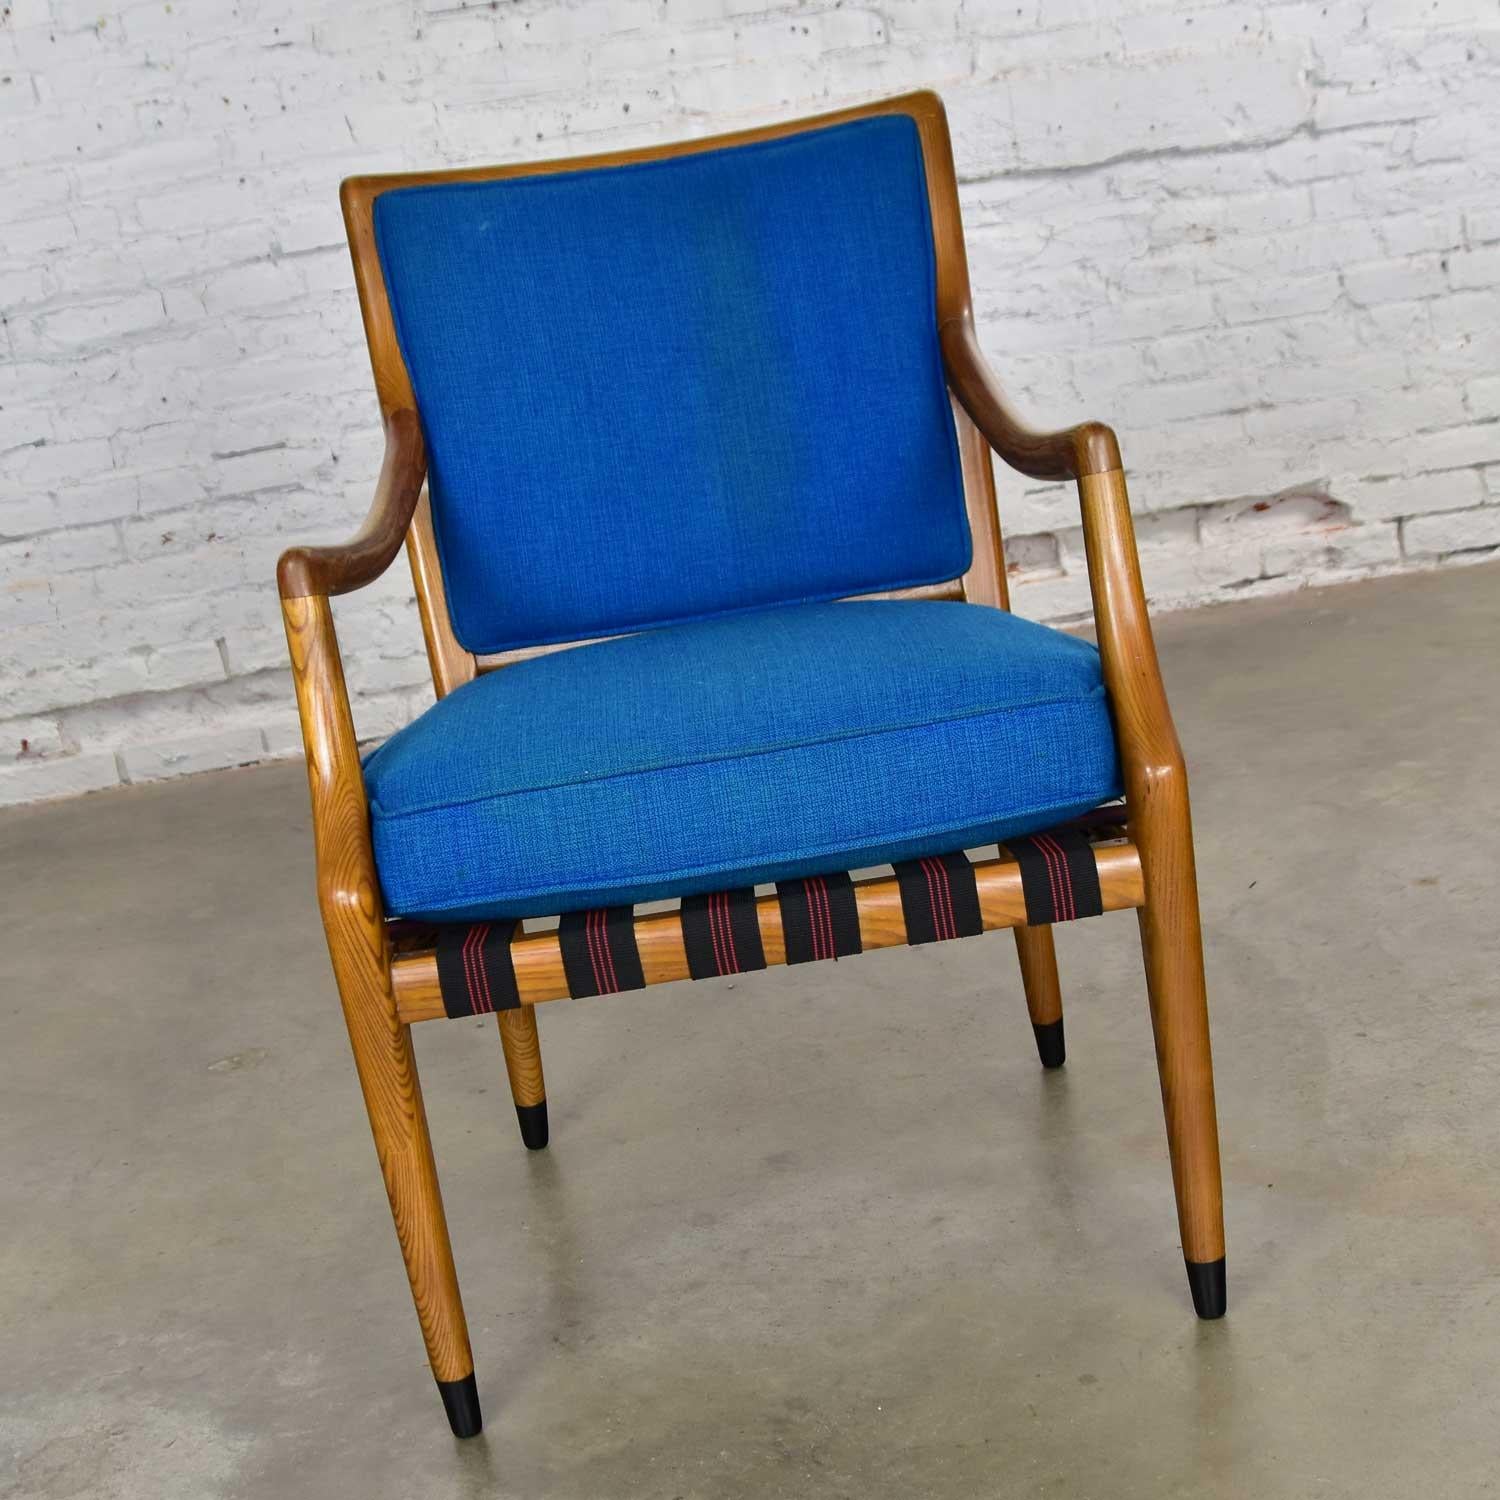 Gorgeous Mid-Century Modern Grand Haven dining or accent chair designed by Jack Van Der Molen for Jamestown Lounge Company. Beautiful vintage condition. We had the foam replaced in the original cushion, but it still wears its original blue hopsack